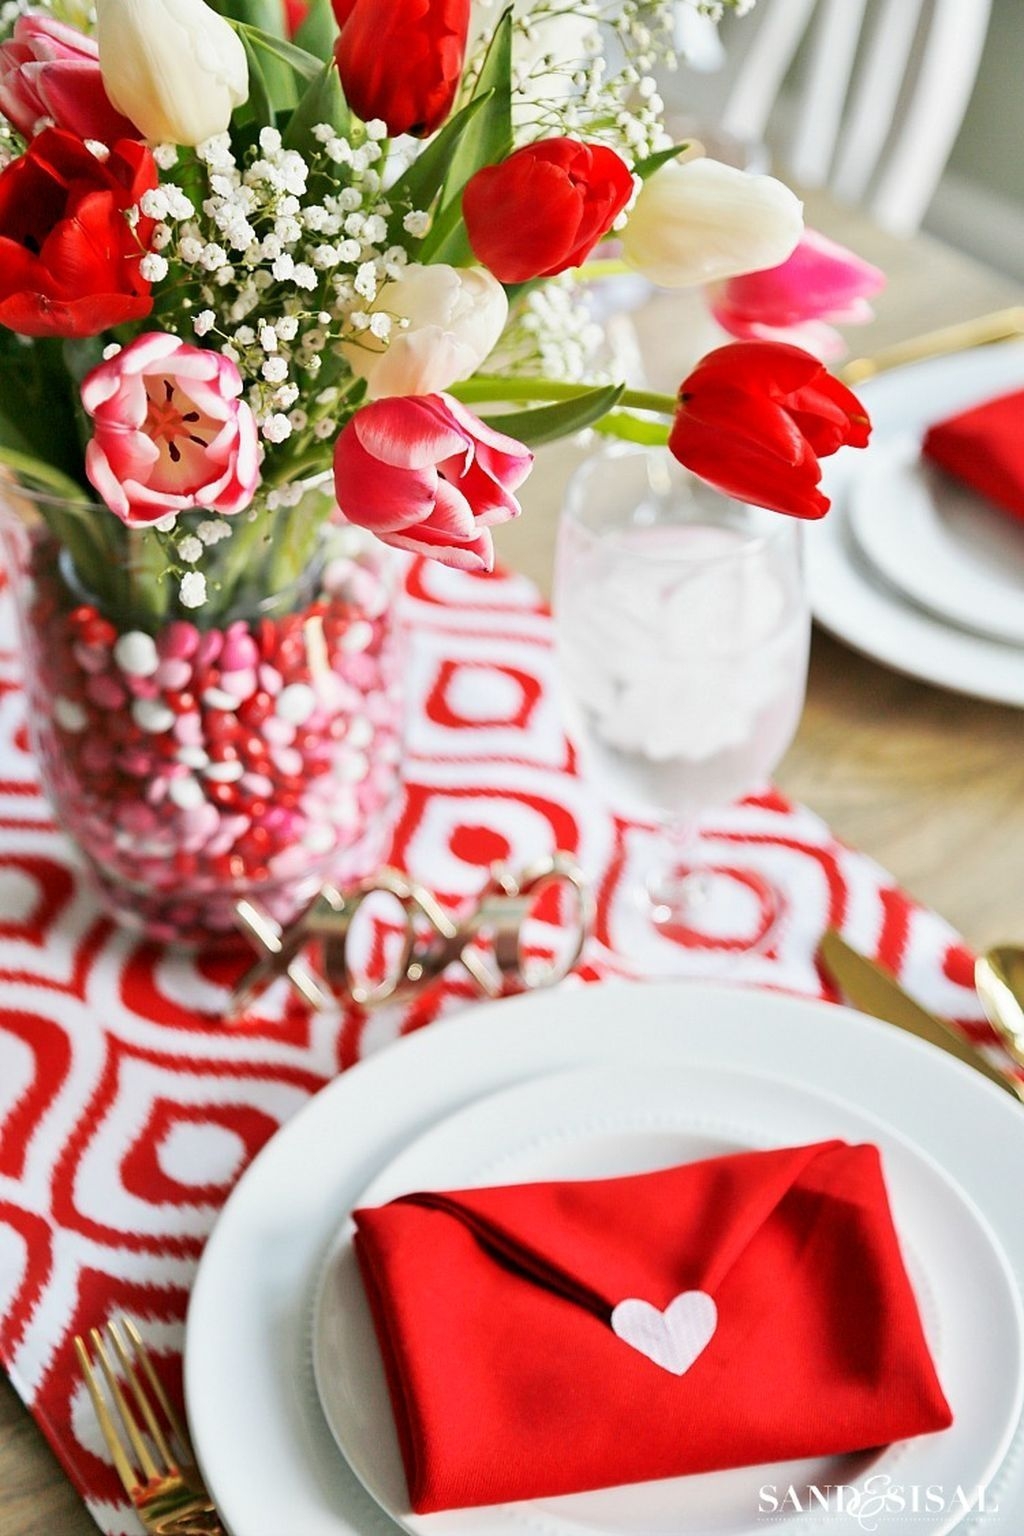 Most Inspiring Valentine’s Day Simple Table Decoration Ideas 27